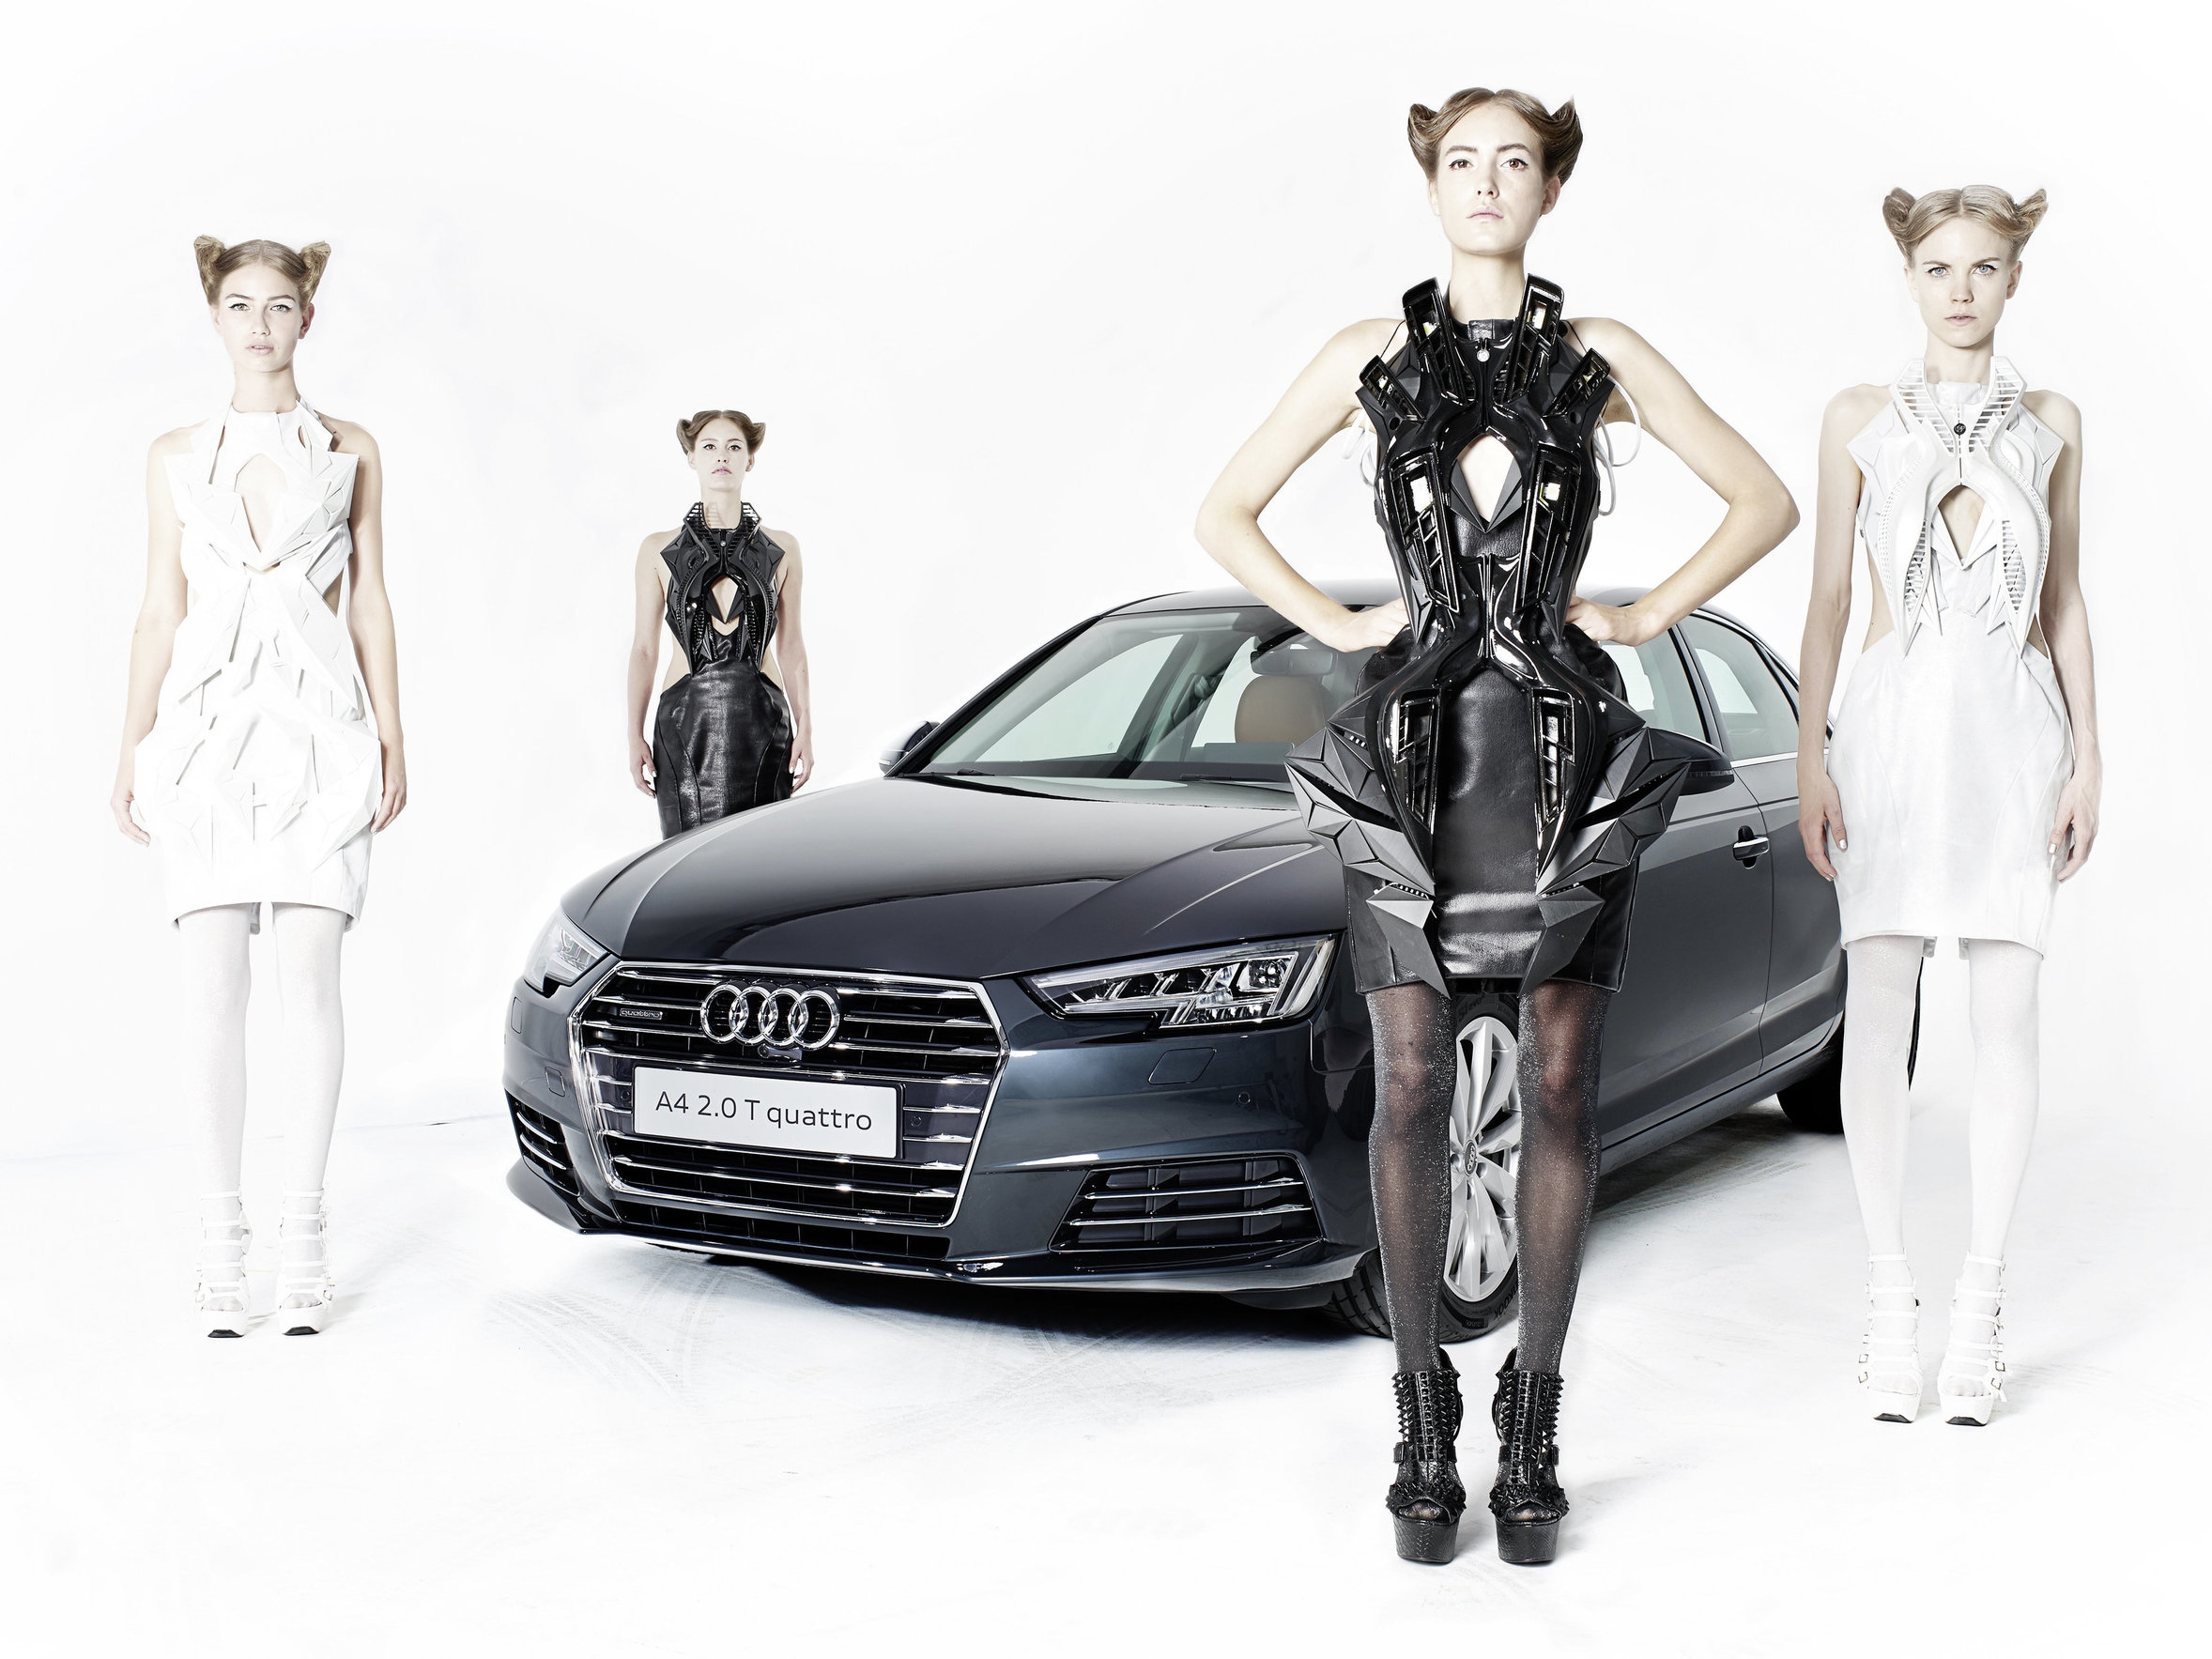 2016-audi-a4-joins-3d-printed-dresses-that-move-or-make-smoke-in-berlin-video-photo-gallery-97661_1.jpg